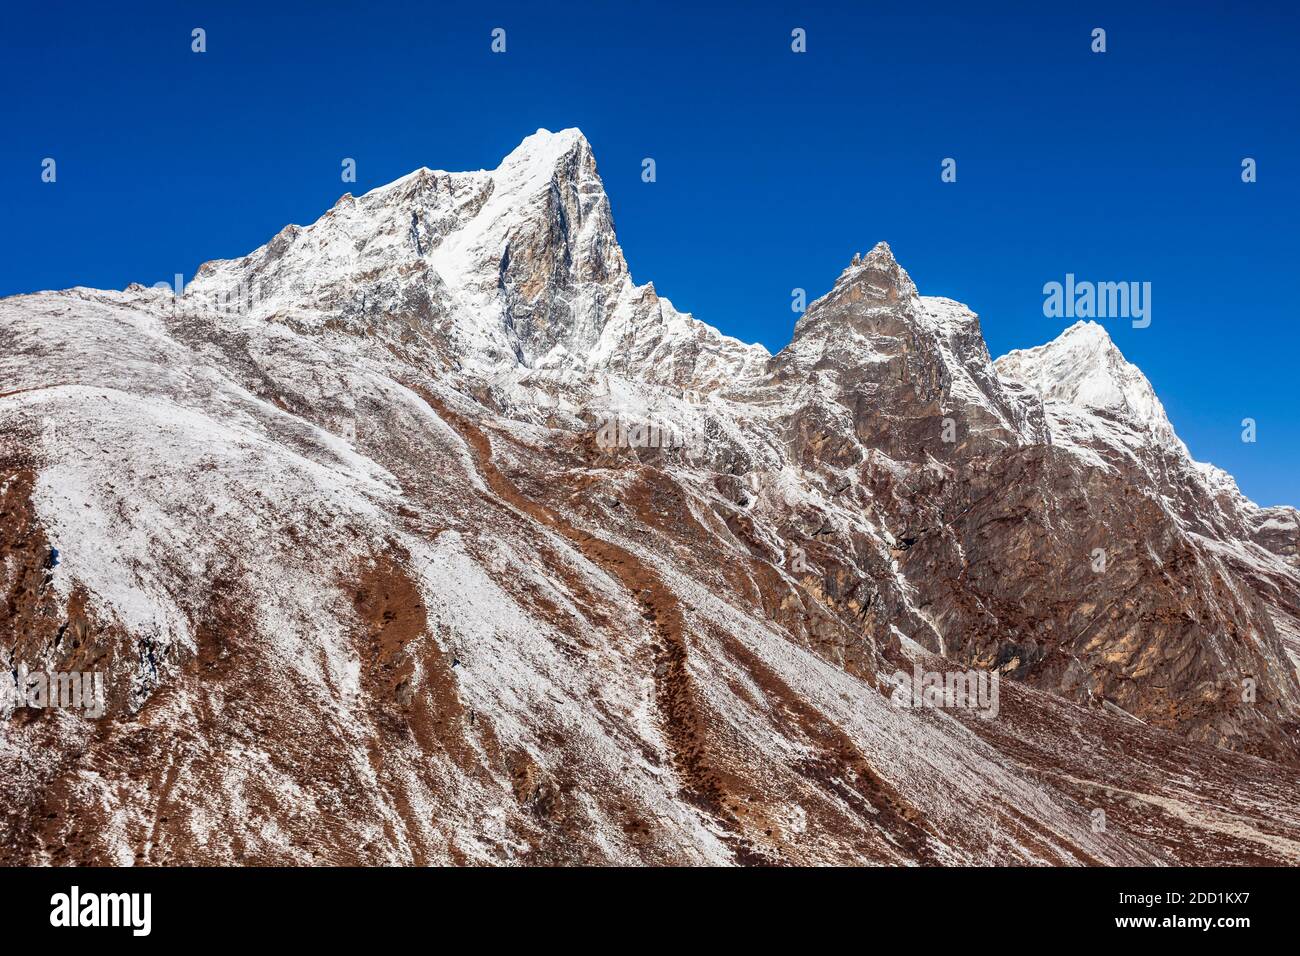 Taboche and Cholatse mountains in Everest region of Nepal Stock Photo